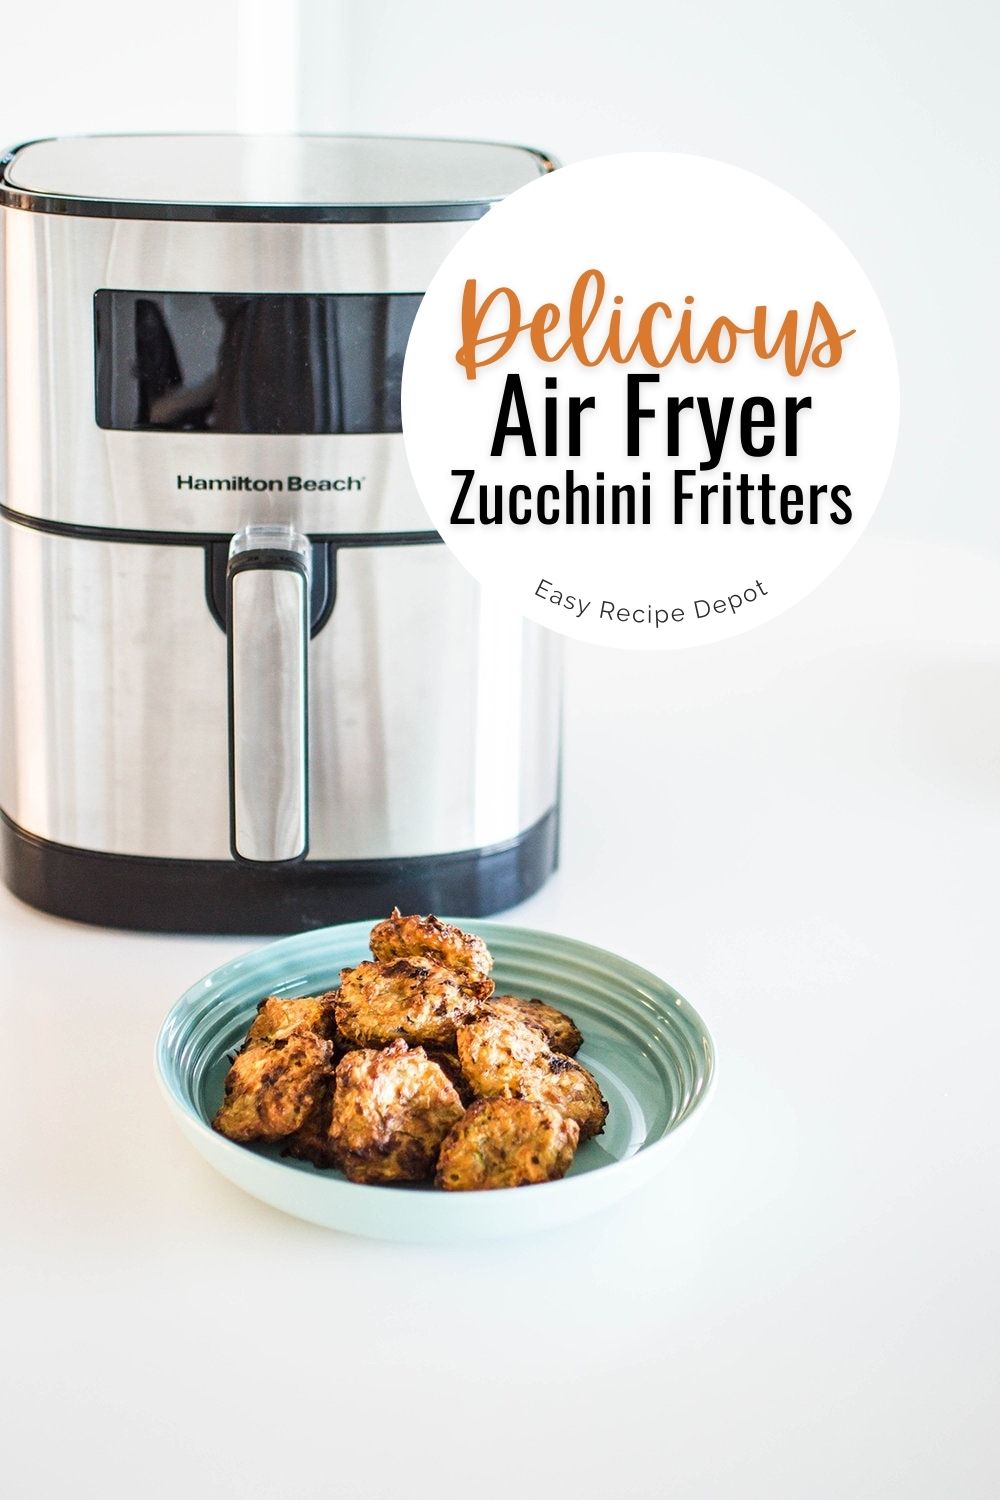 Delicious Air Fryer Zucchini Fritters.